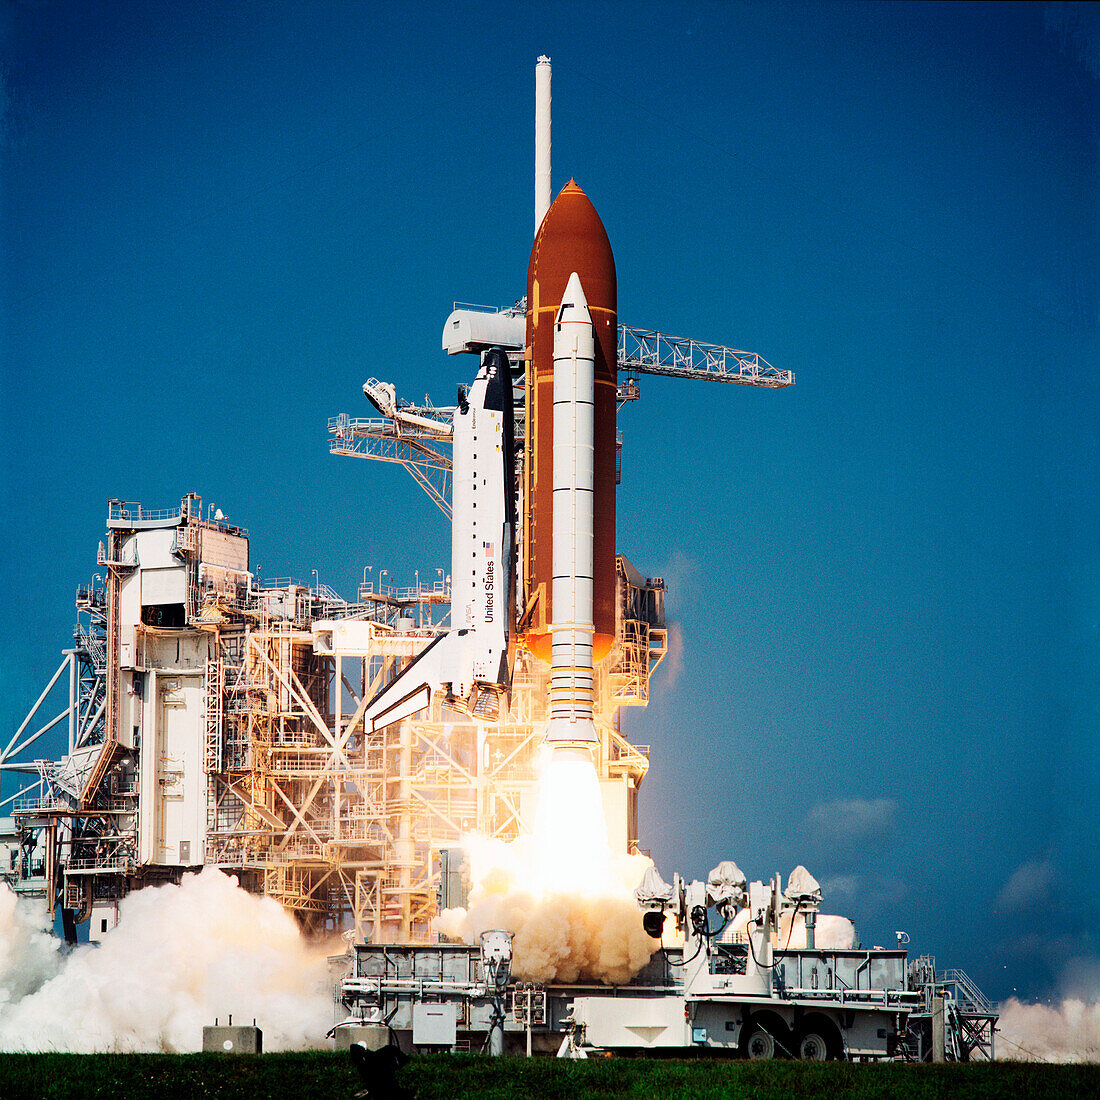 Launch of Endeavour on STS-47